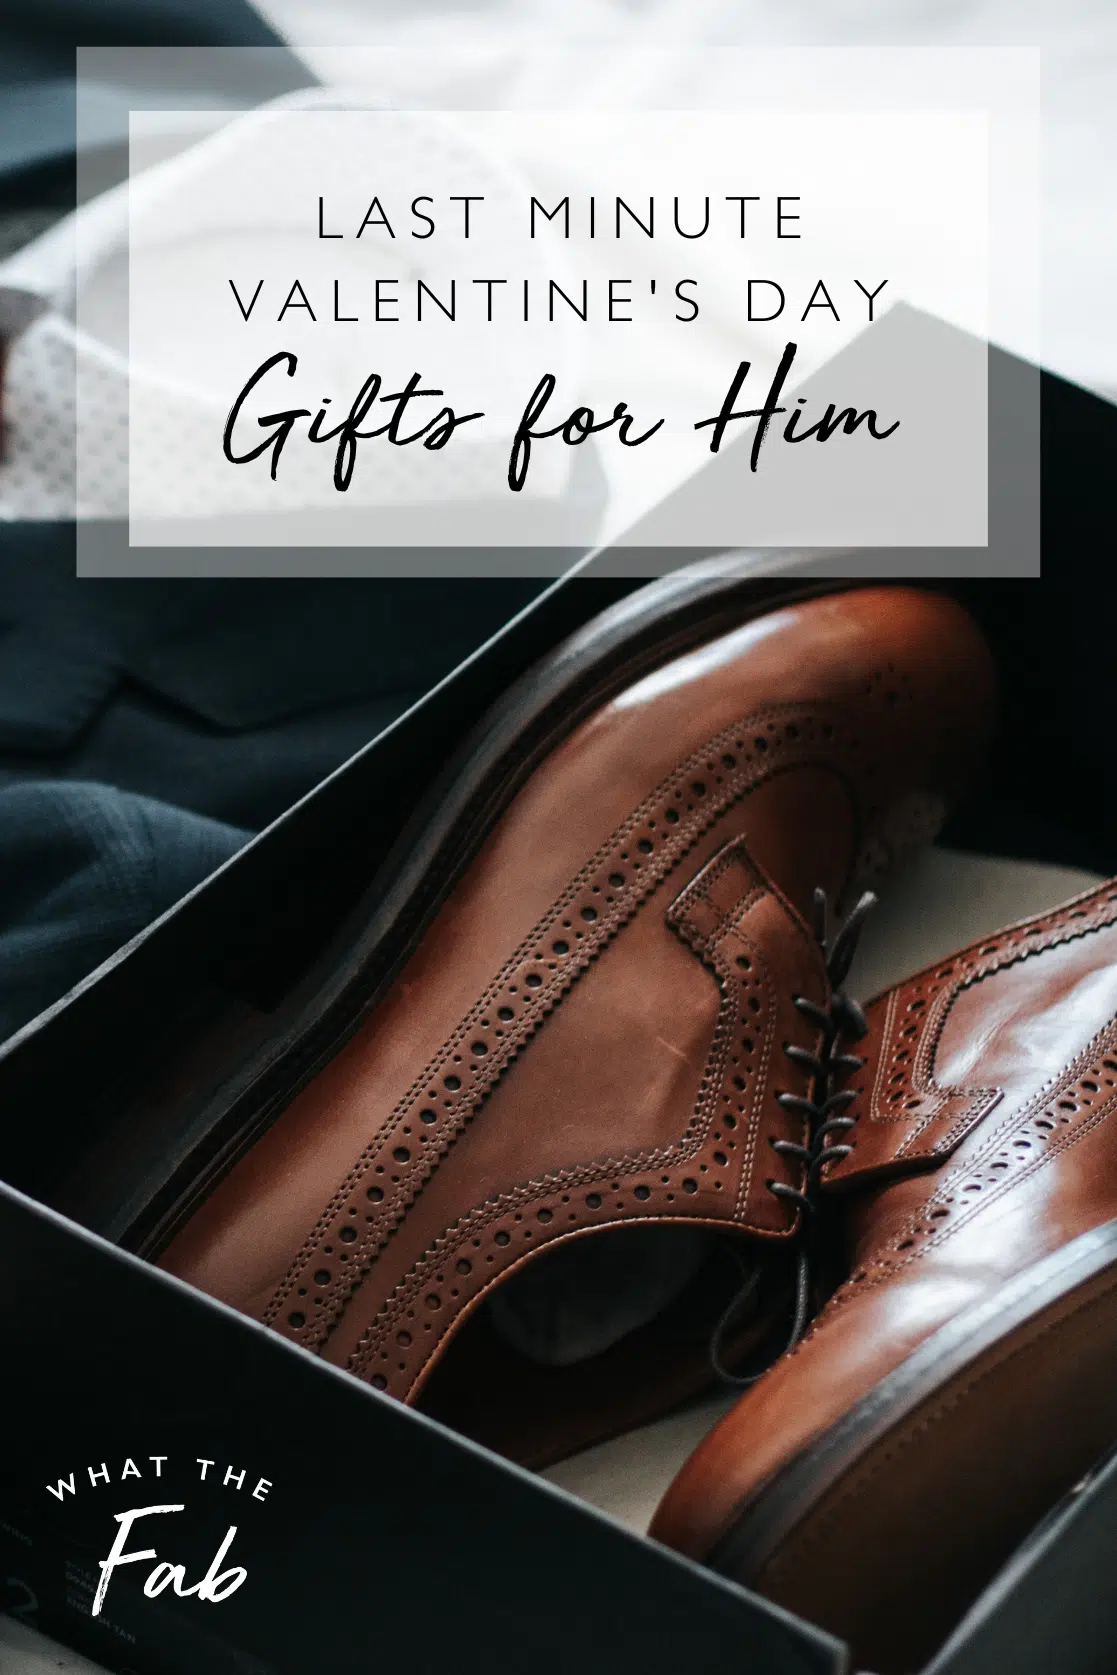 5 Relaxing Last Minute Valentine's Day Gifts﻿ | The Spa'ah Blog